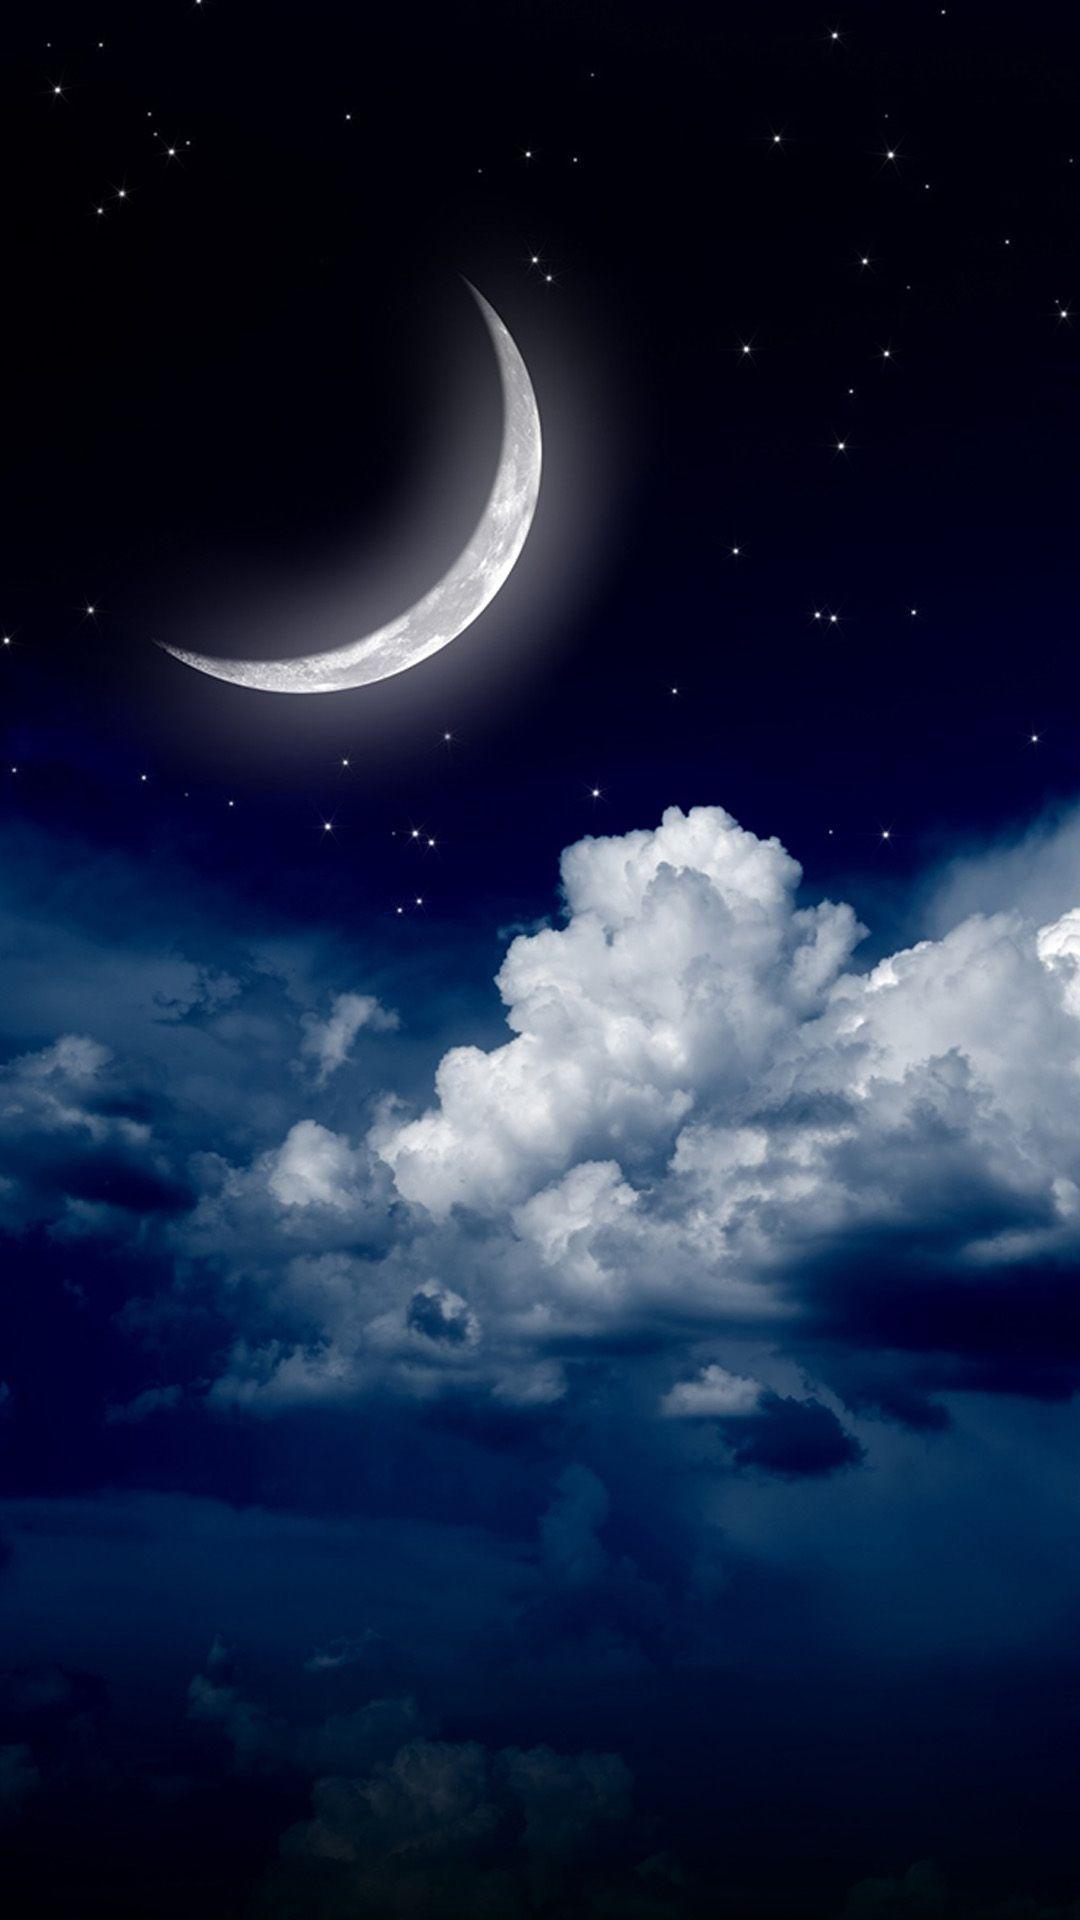 Sky clouds moon. iPhone wallpaper of night stars view and scenery